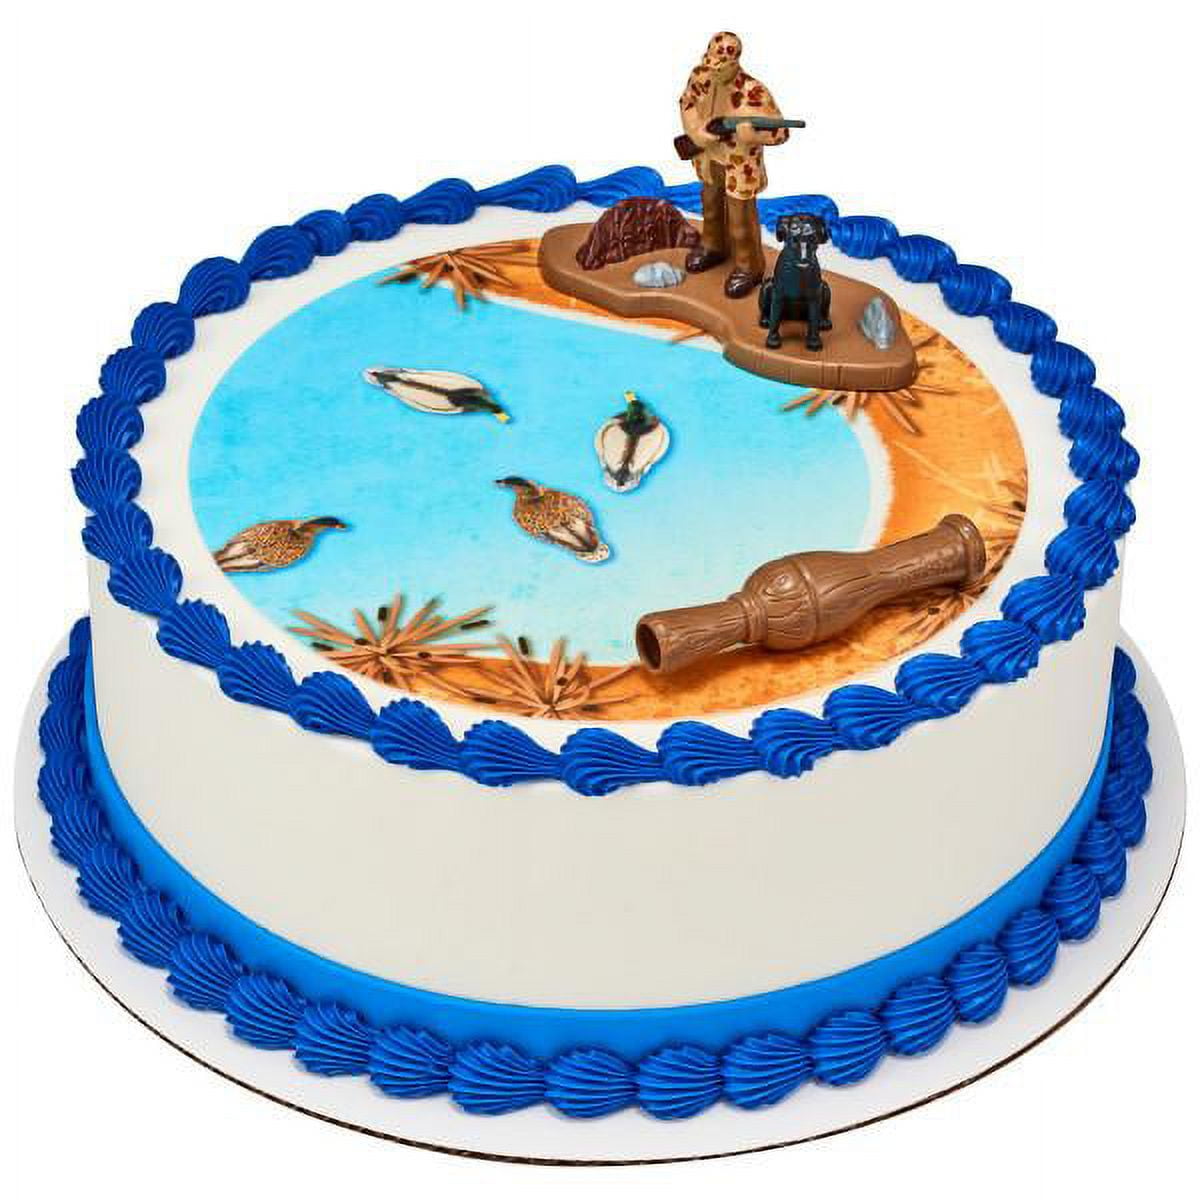 Fishing and Hunting Theme Cake, Fondant Toppers, Hunting, Fishing,  Retirement Cake Topper, Men's Birthday Theme 